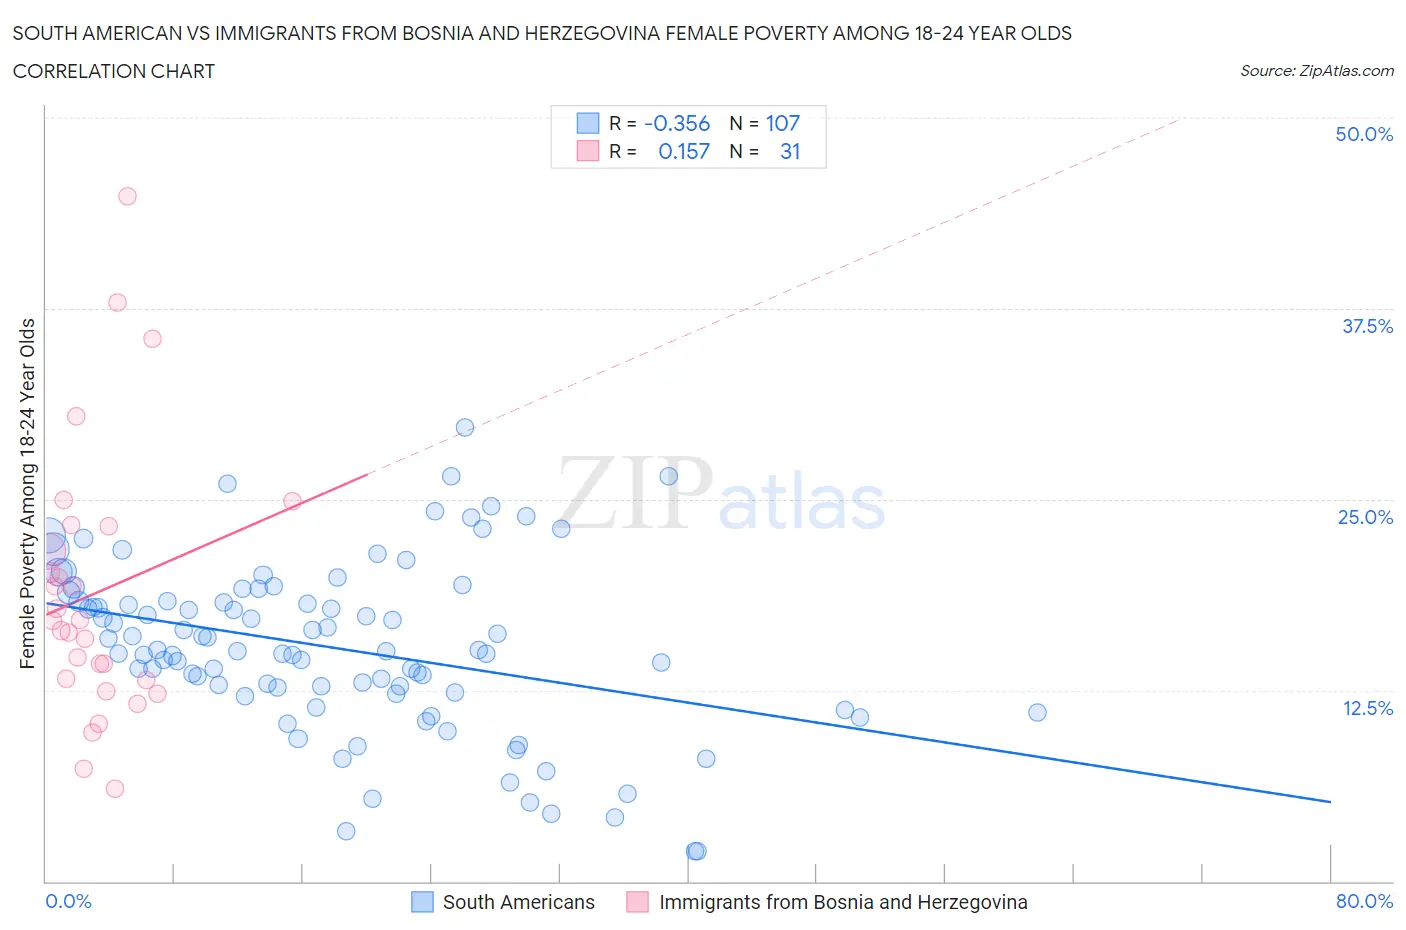 South American vs Immigrants from Bosnia and Herzegovina Female Poverty Among 18-24 Year Olds